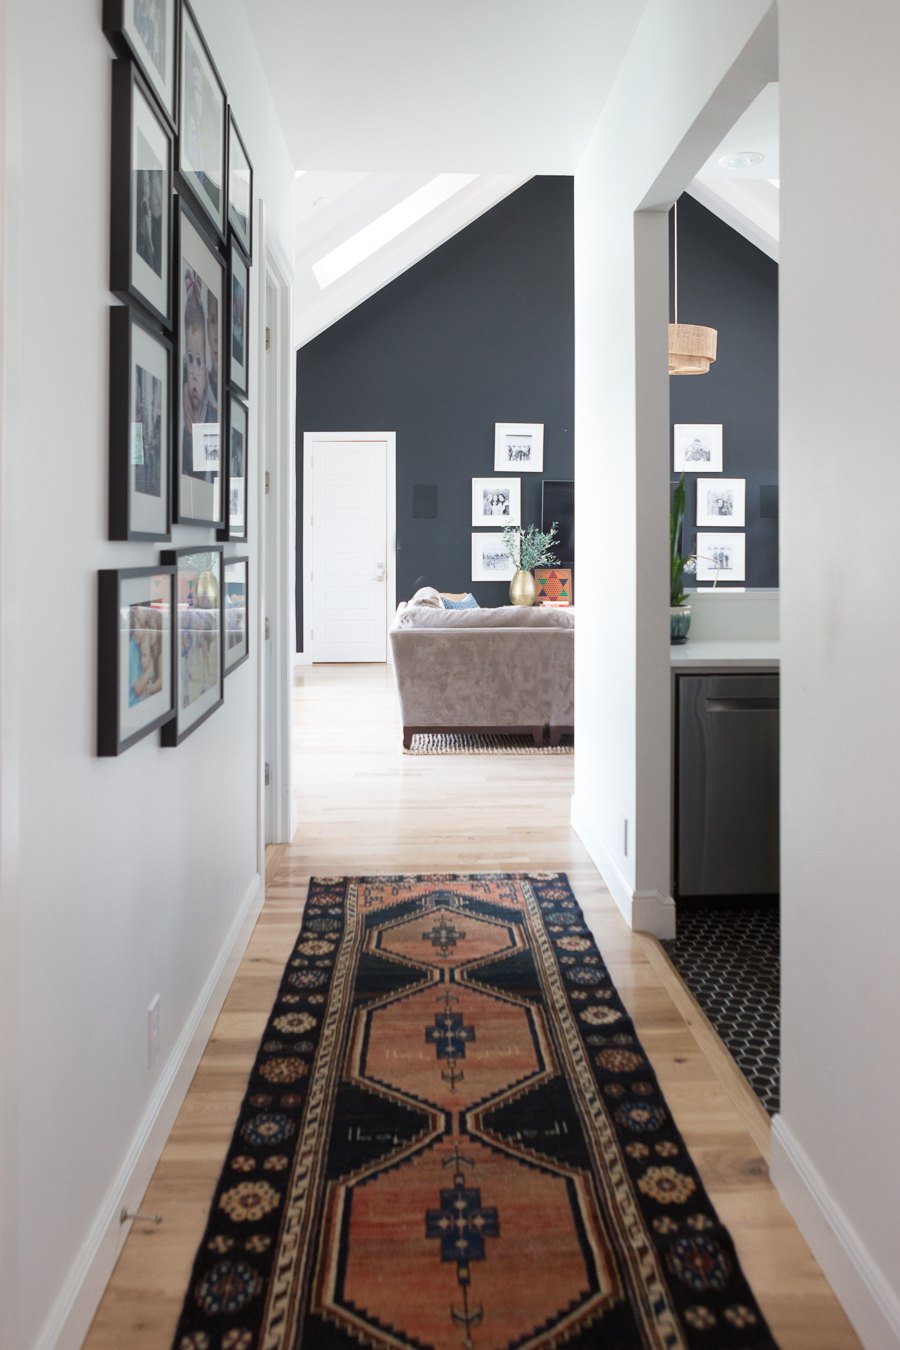 TEEN HANGOUT ROOM DESIGN PLAN AND HANGING CHAIRS looking down the hallway with a dark colored runner and wall art